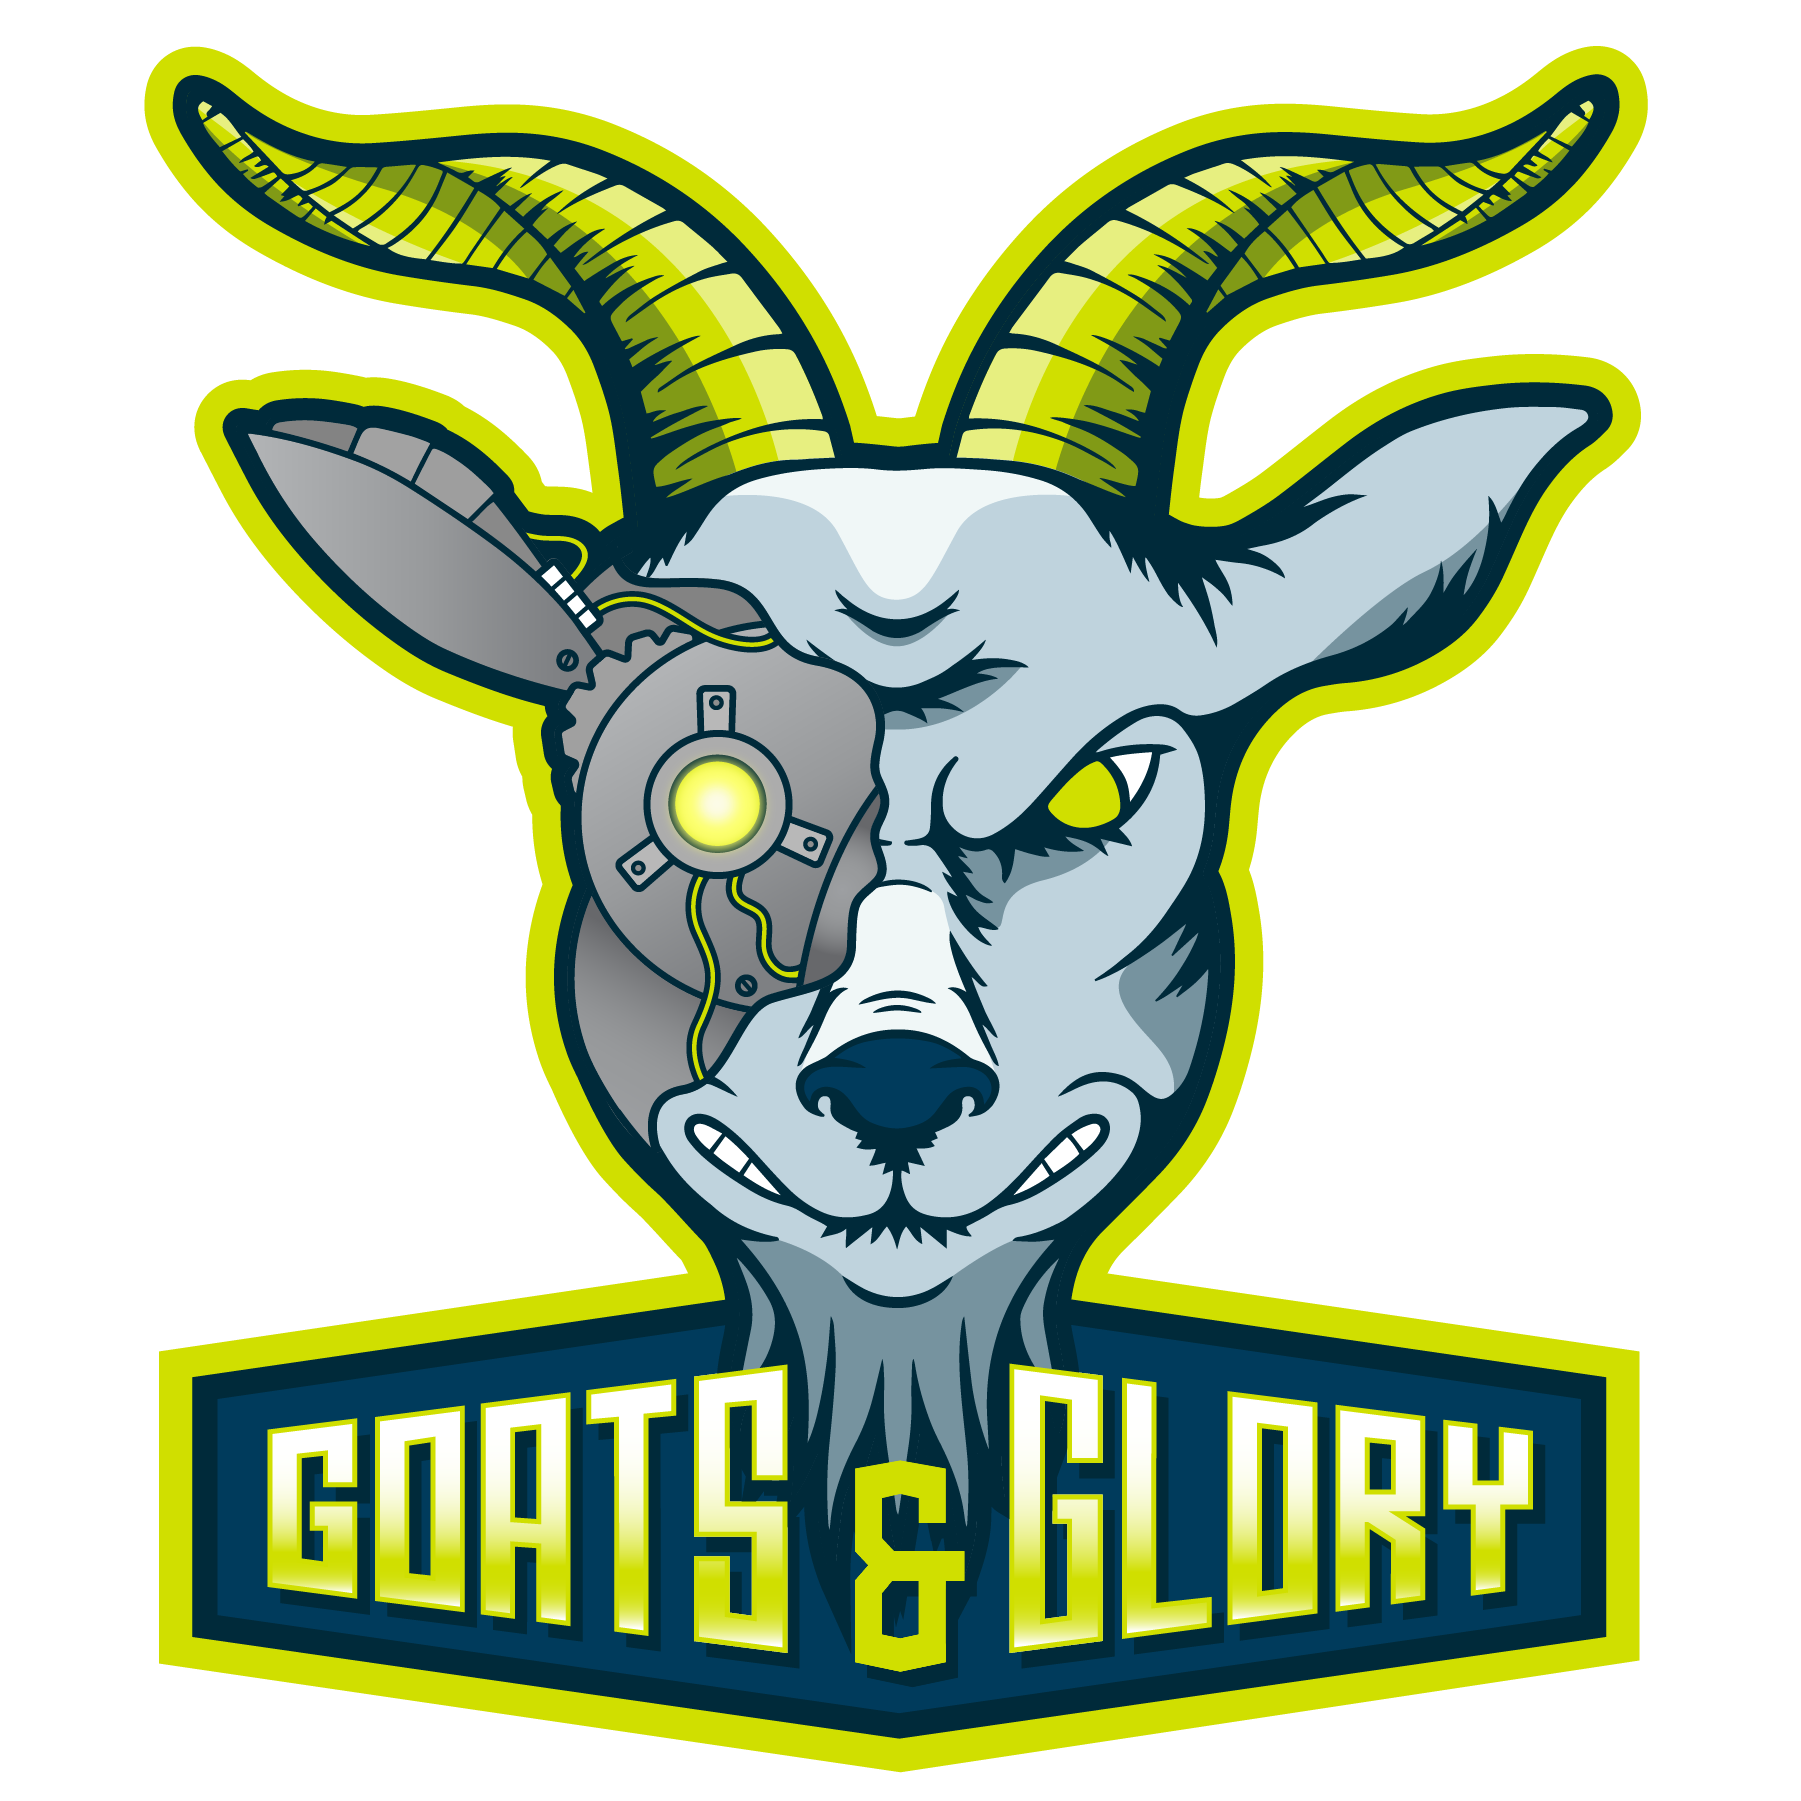 The official logo of Goats & Glory, the Navy Esports team